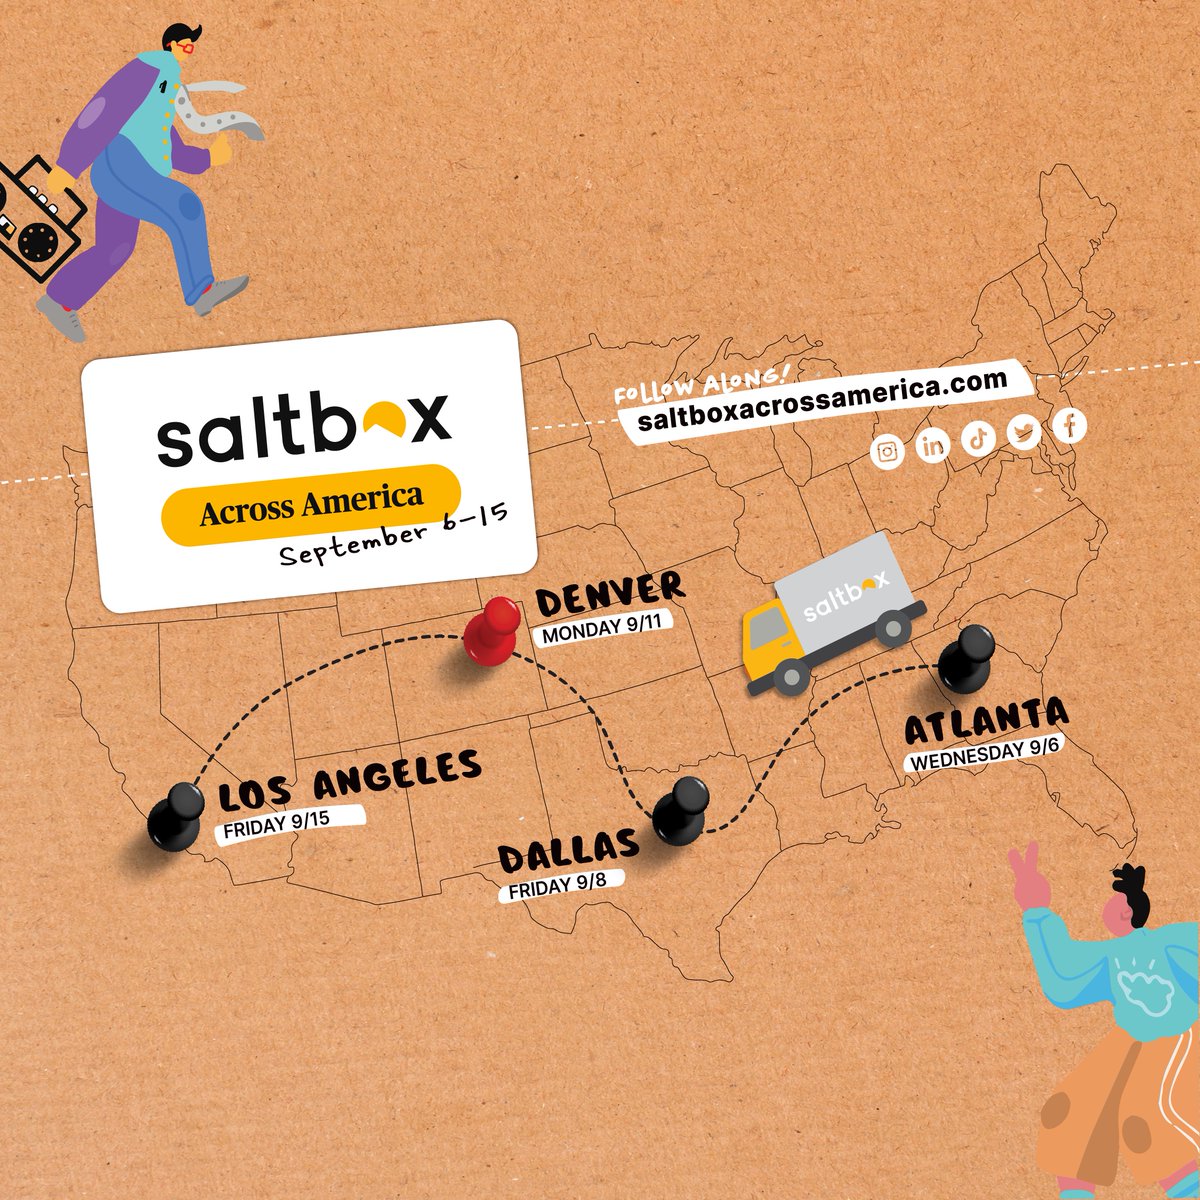 Denver, Colorado is the next #SaltboxAcrossAmerica stop, and we can’t wait to see you! 📍 4800 Dahlia Street Denver, CO 80216 ➡️ RSVP at the link in our bio! #JoinSaltbox #Denver #DenverEntrepreneur #DenverEcommerce #DenverMaker #DenverSmallBusiness